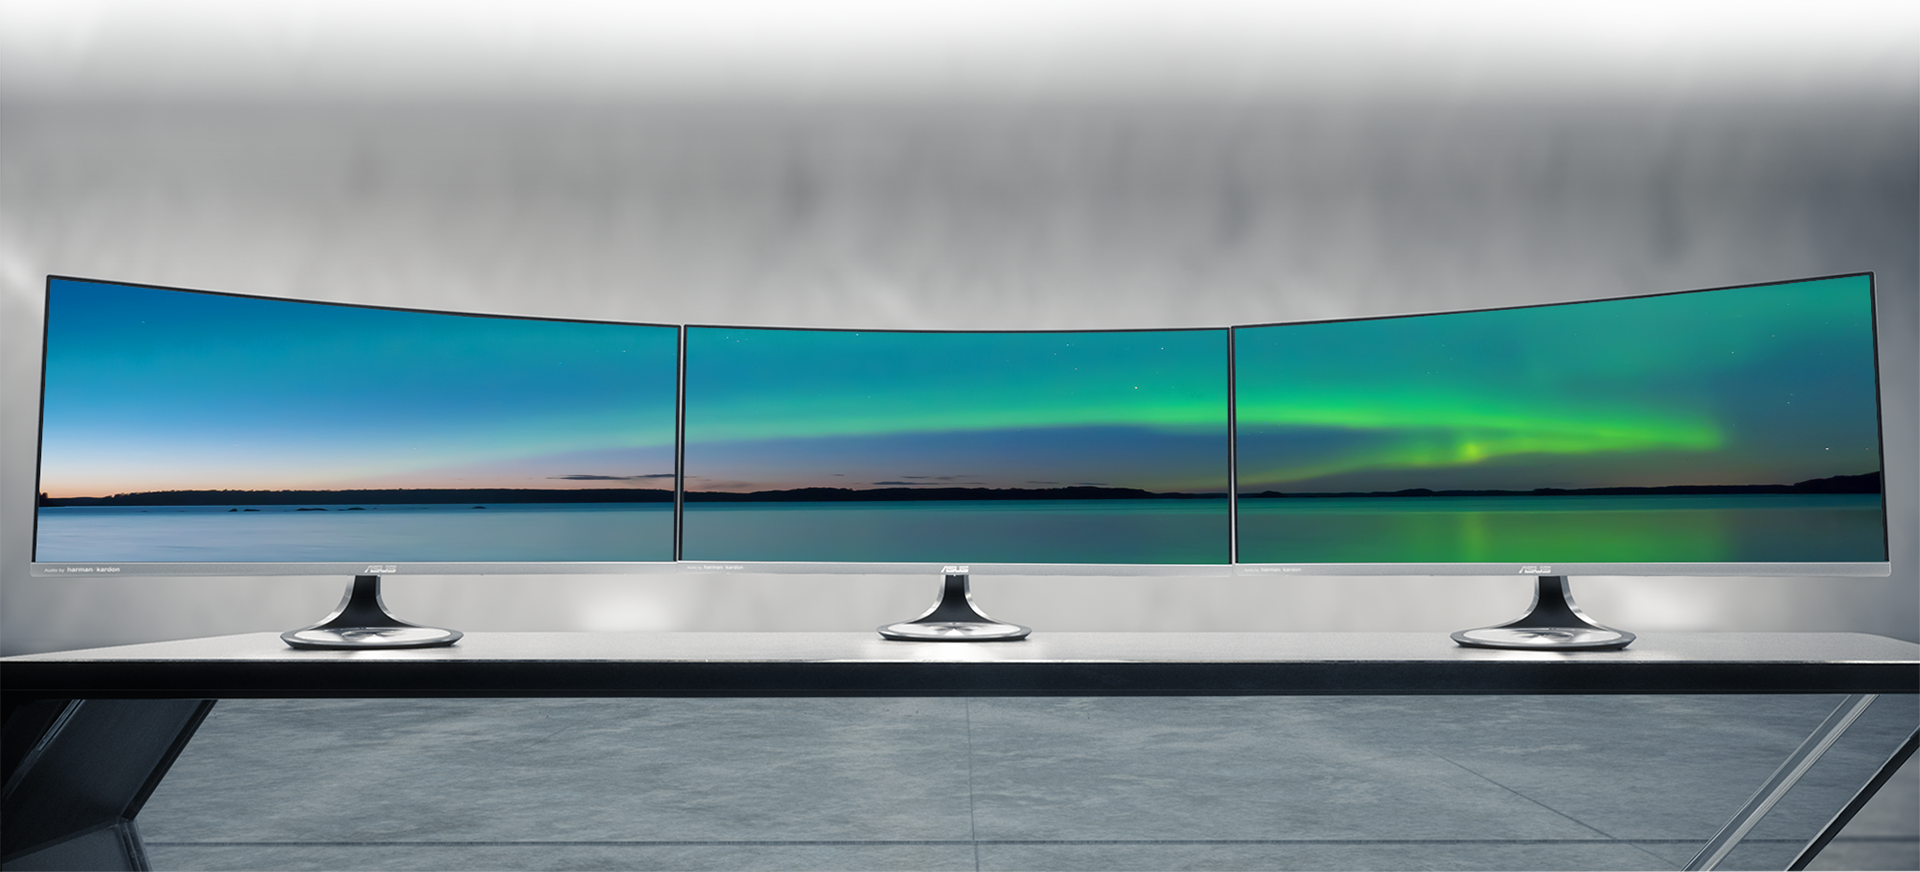 ASUS Designo Curve MX34VQ is a 34-inch display with an Ultra-Wide QHD panel that provides viewers with highly-detailed visuals